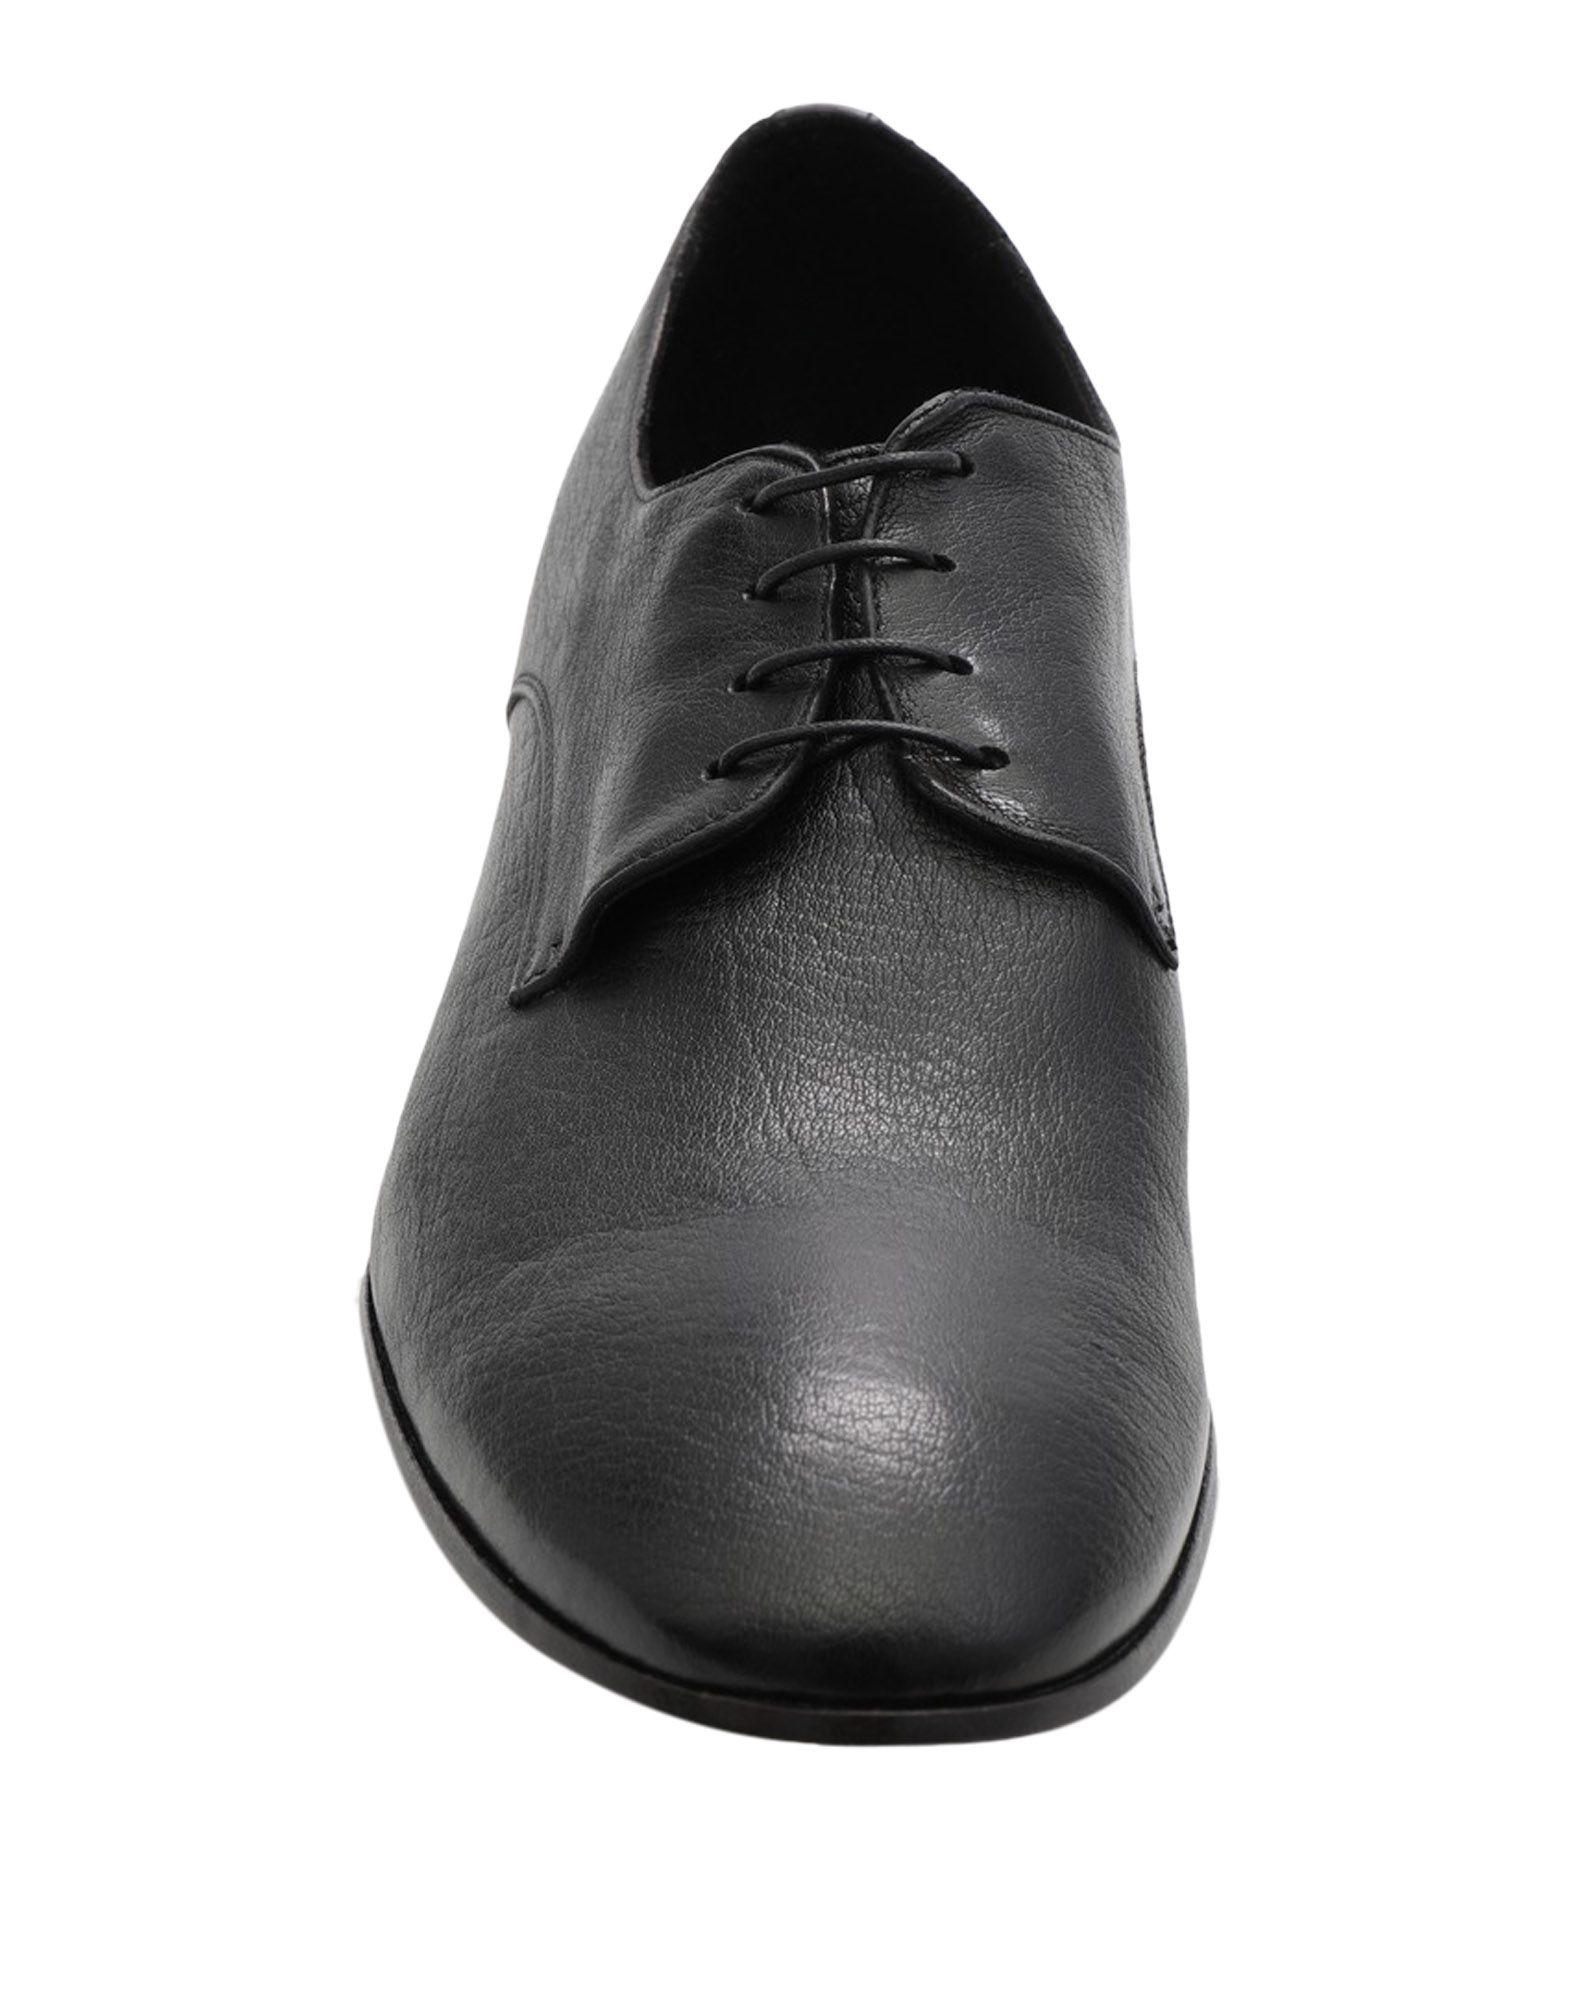 Raparo Leather Lace-up Shoe in Black for Men - Lyst